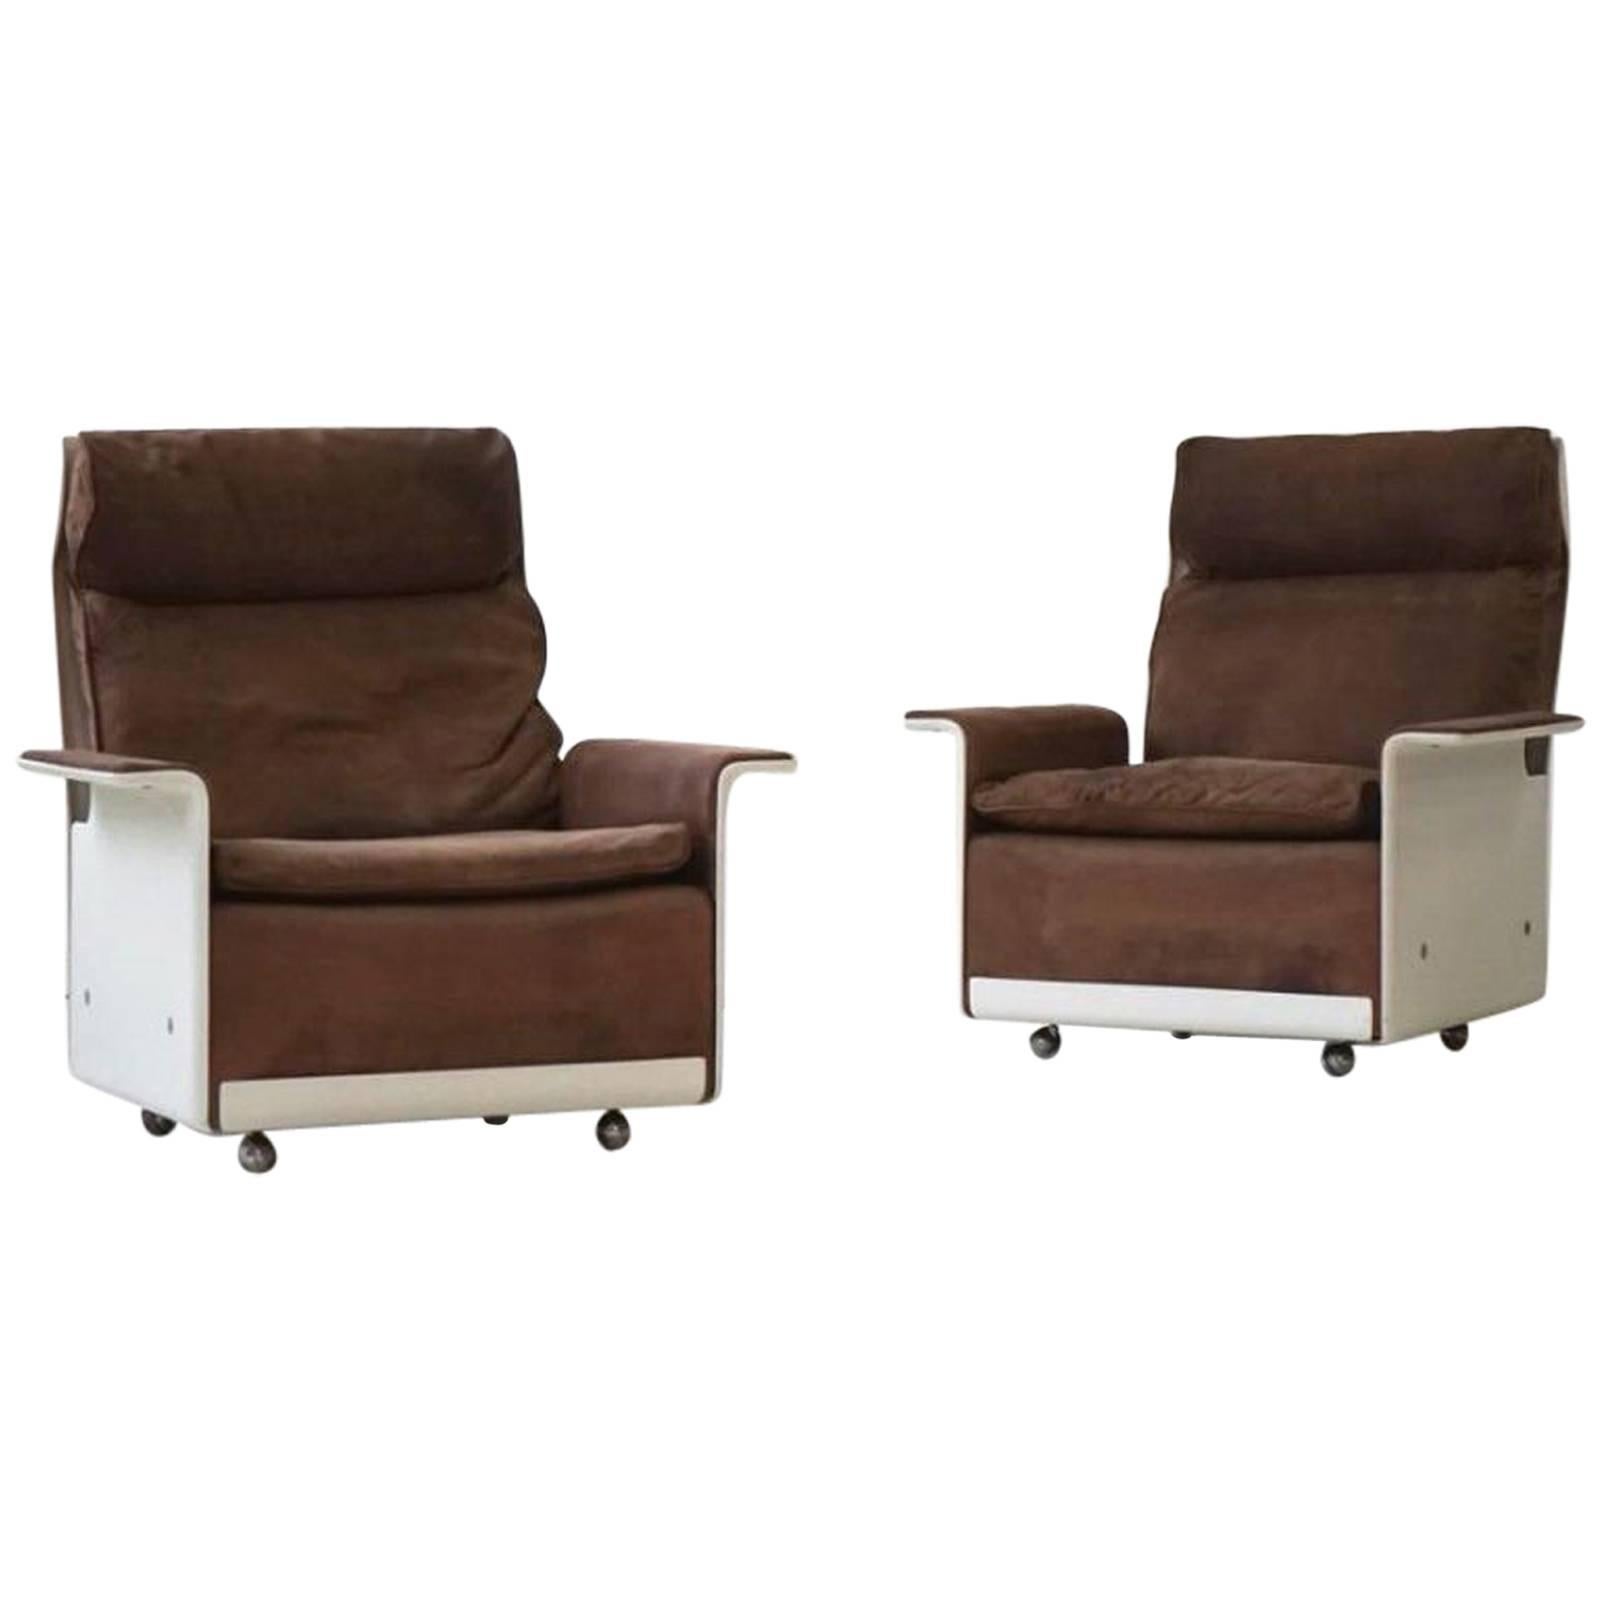 Set of Two Lounge Armchairs Dieter Rams for Vitsoe, RZ 62 620, Nubuck Leather